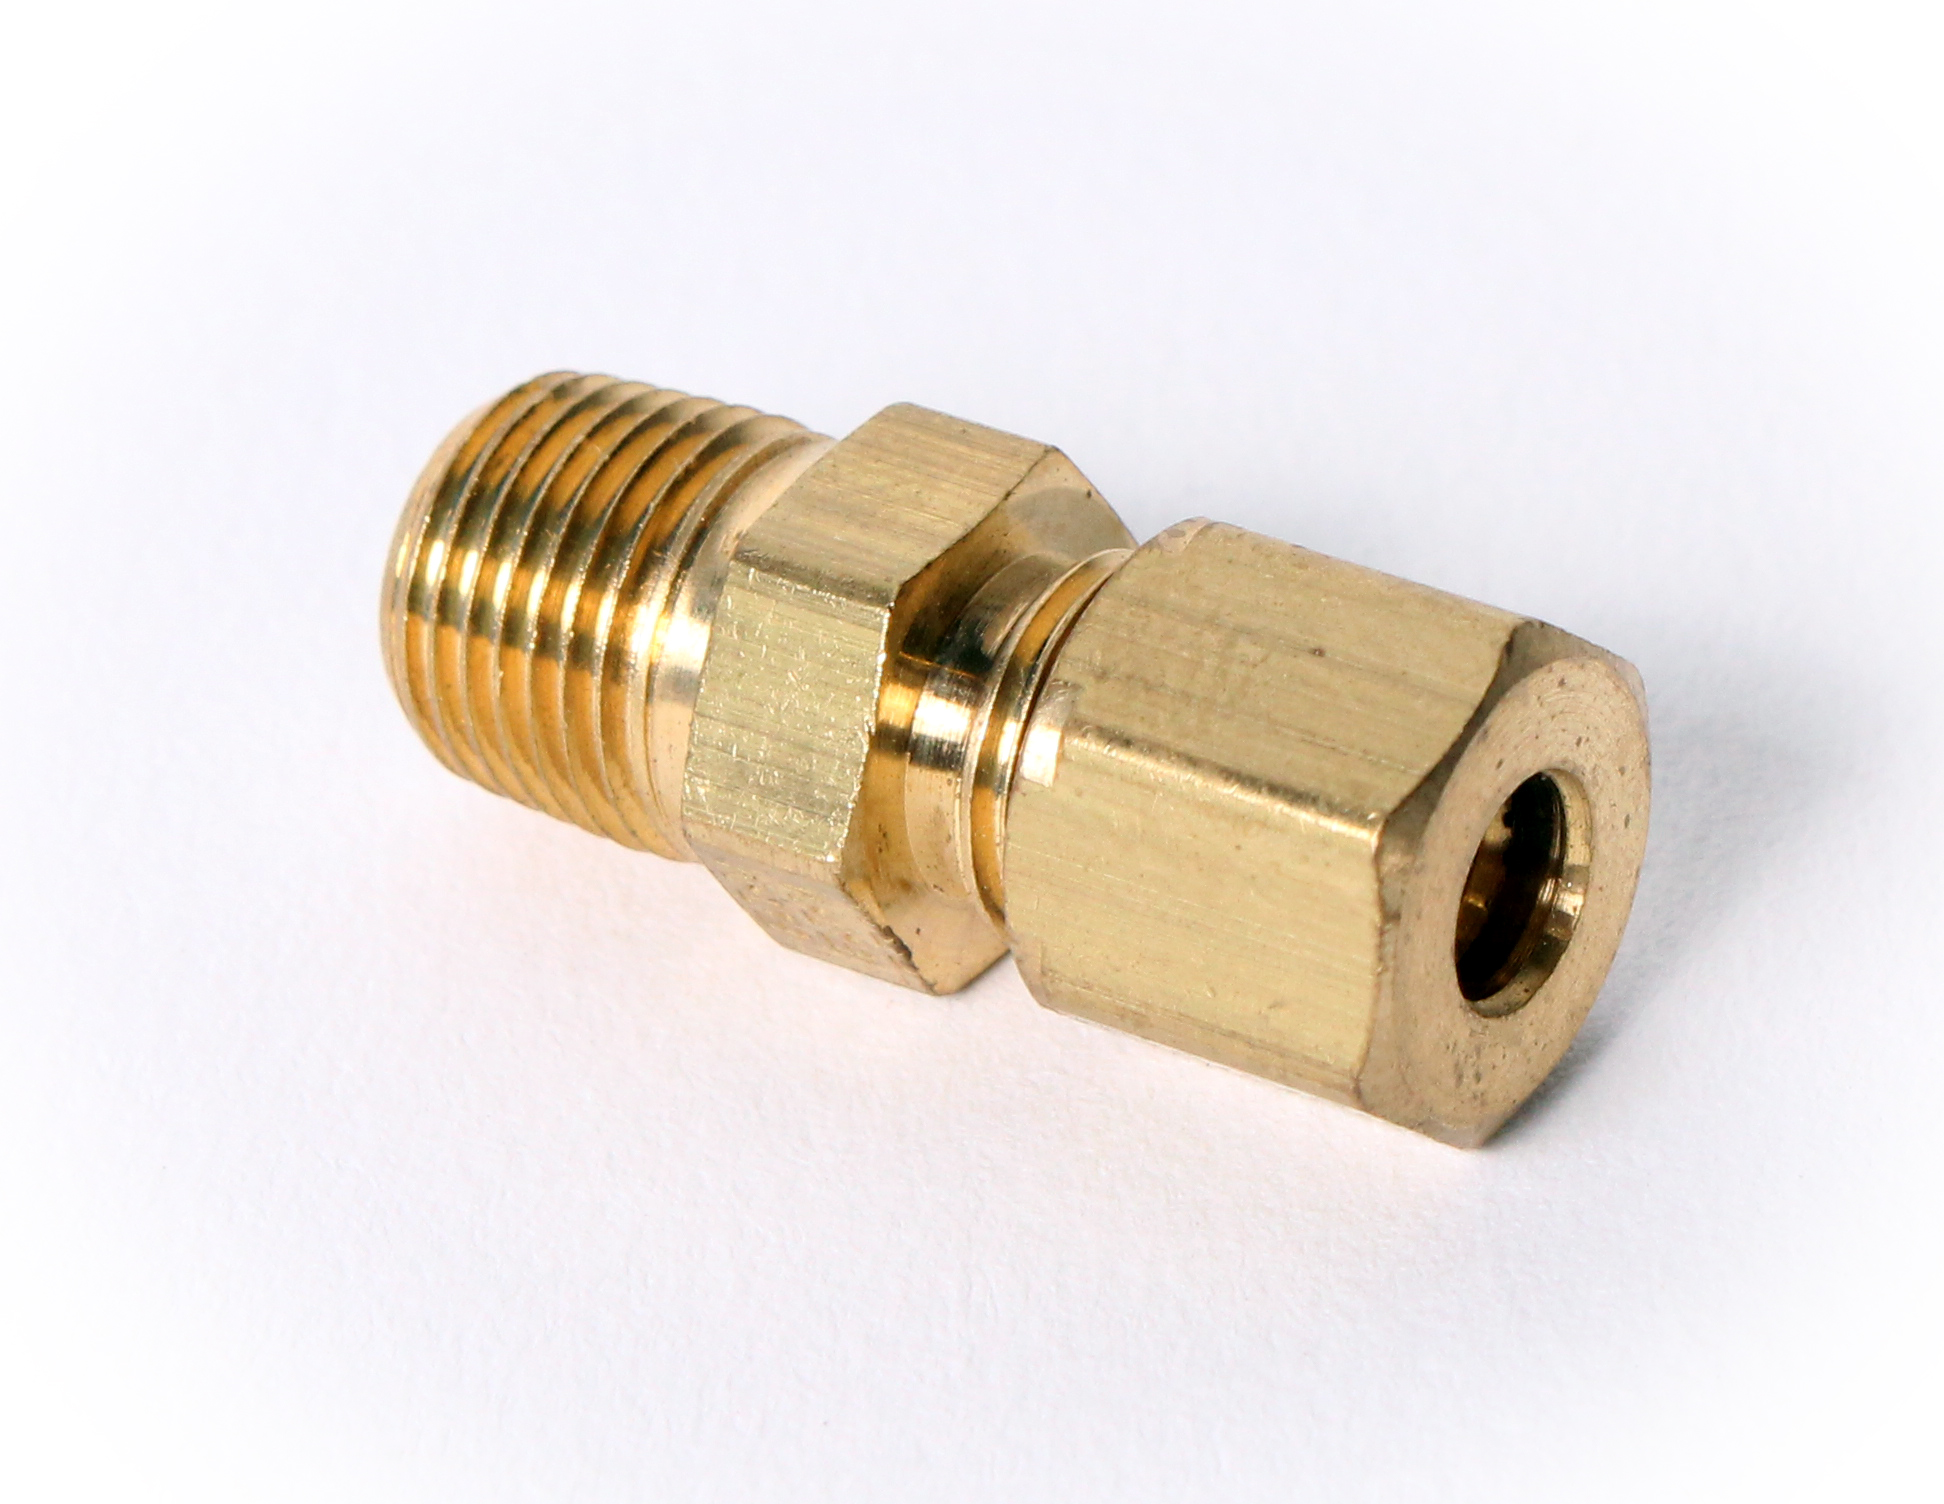 1/8 NPT Male Connector Fitting